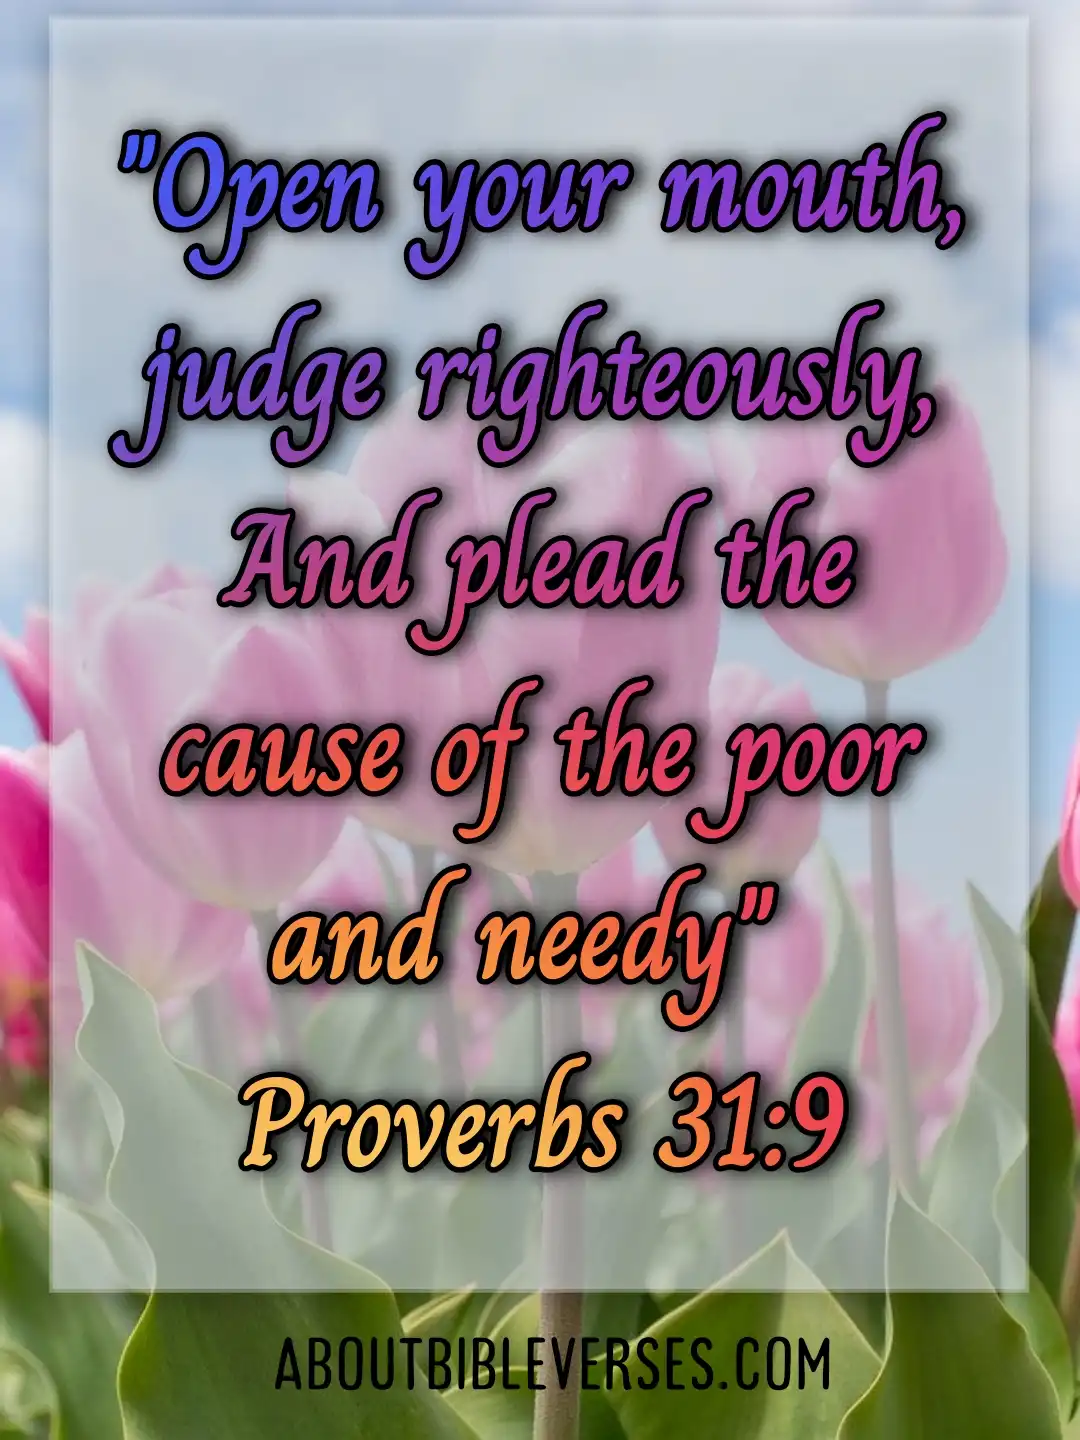 Bible Verses About Serving Others (Proverbs 31:9)